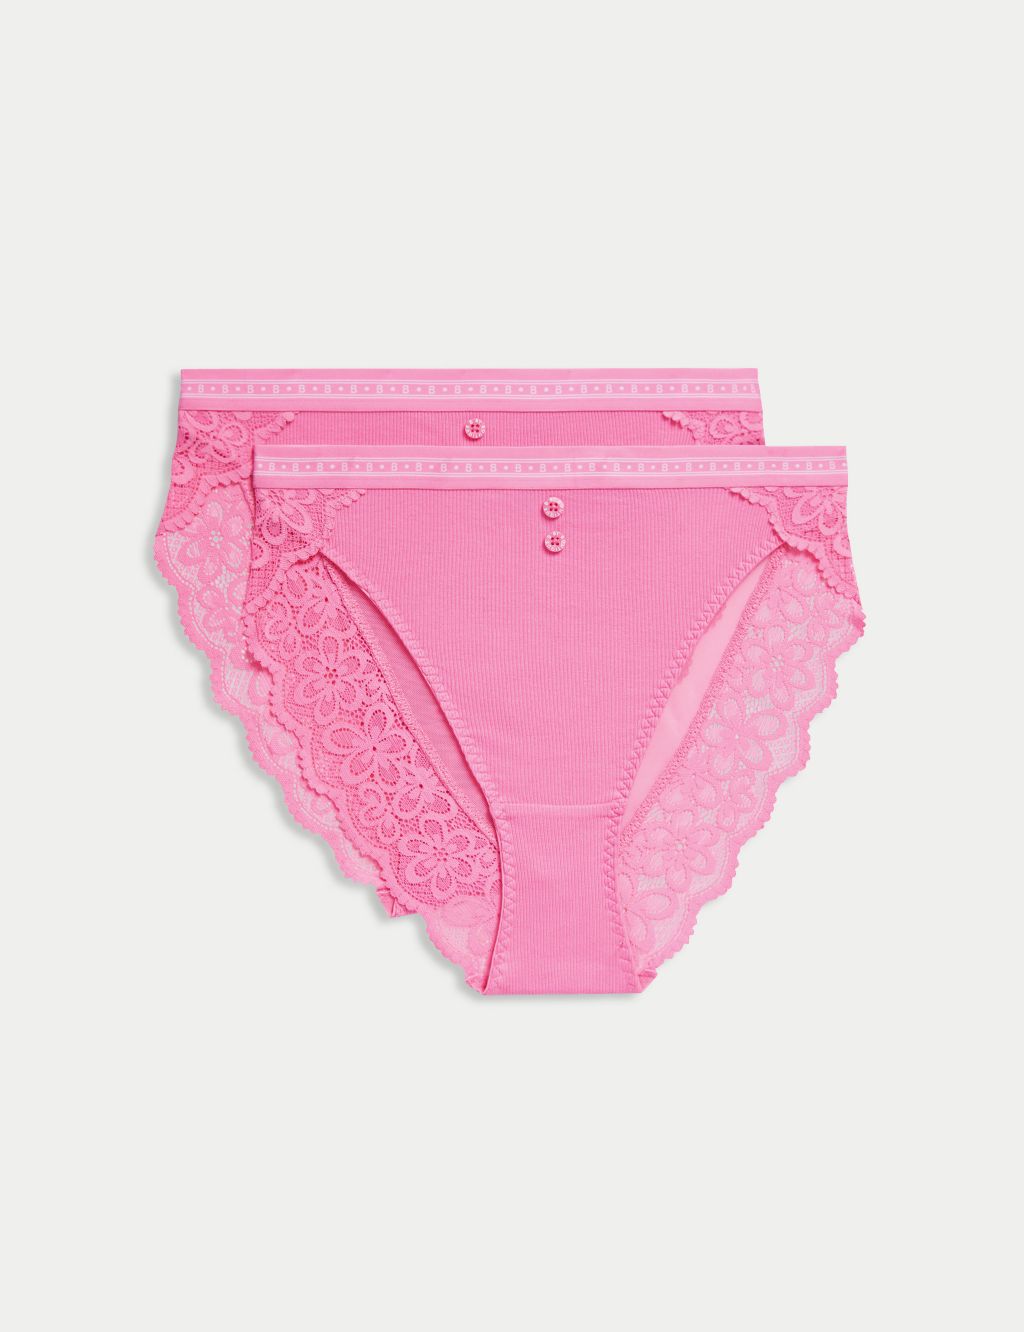 5 Pack High Leg Print Knickers, Brand : Matalan, Color: Pink, Size: 12